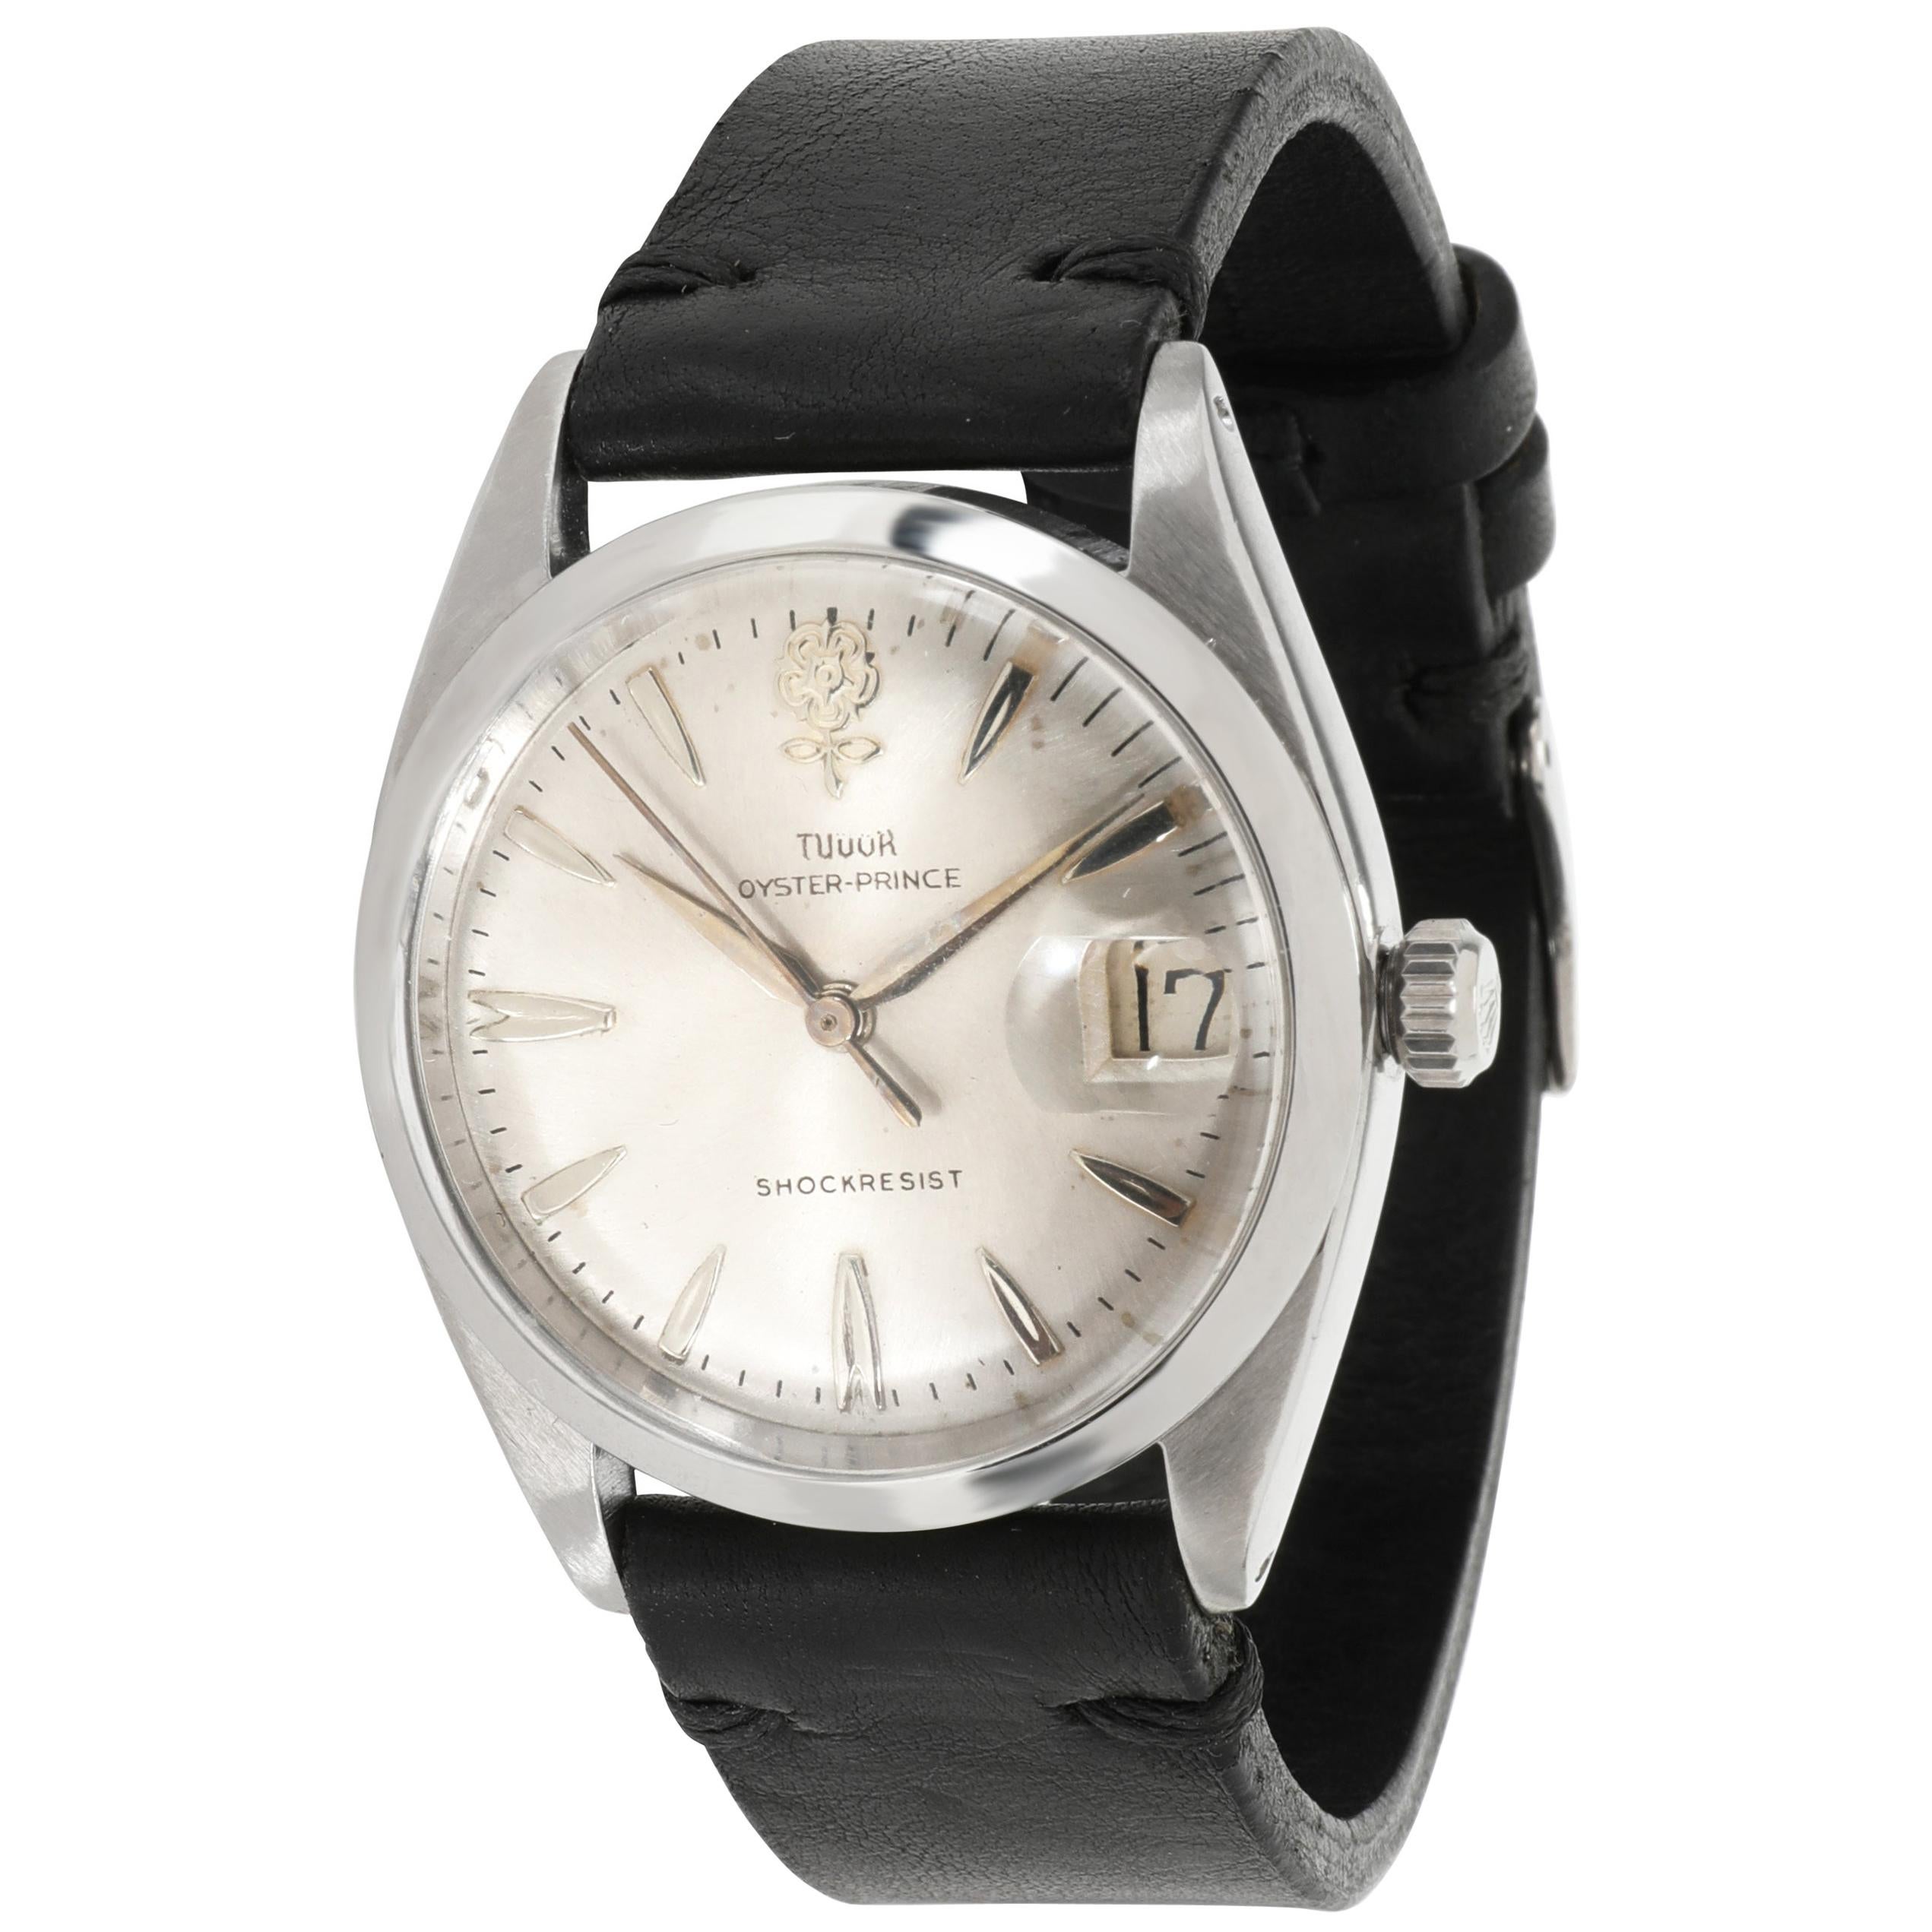 Tudor Oyster Prince 7962 Men's Watch in Stainless Steel